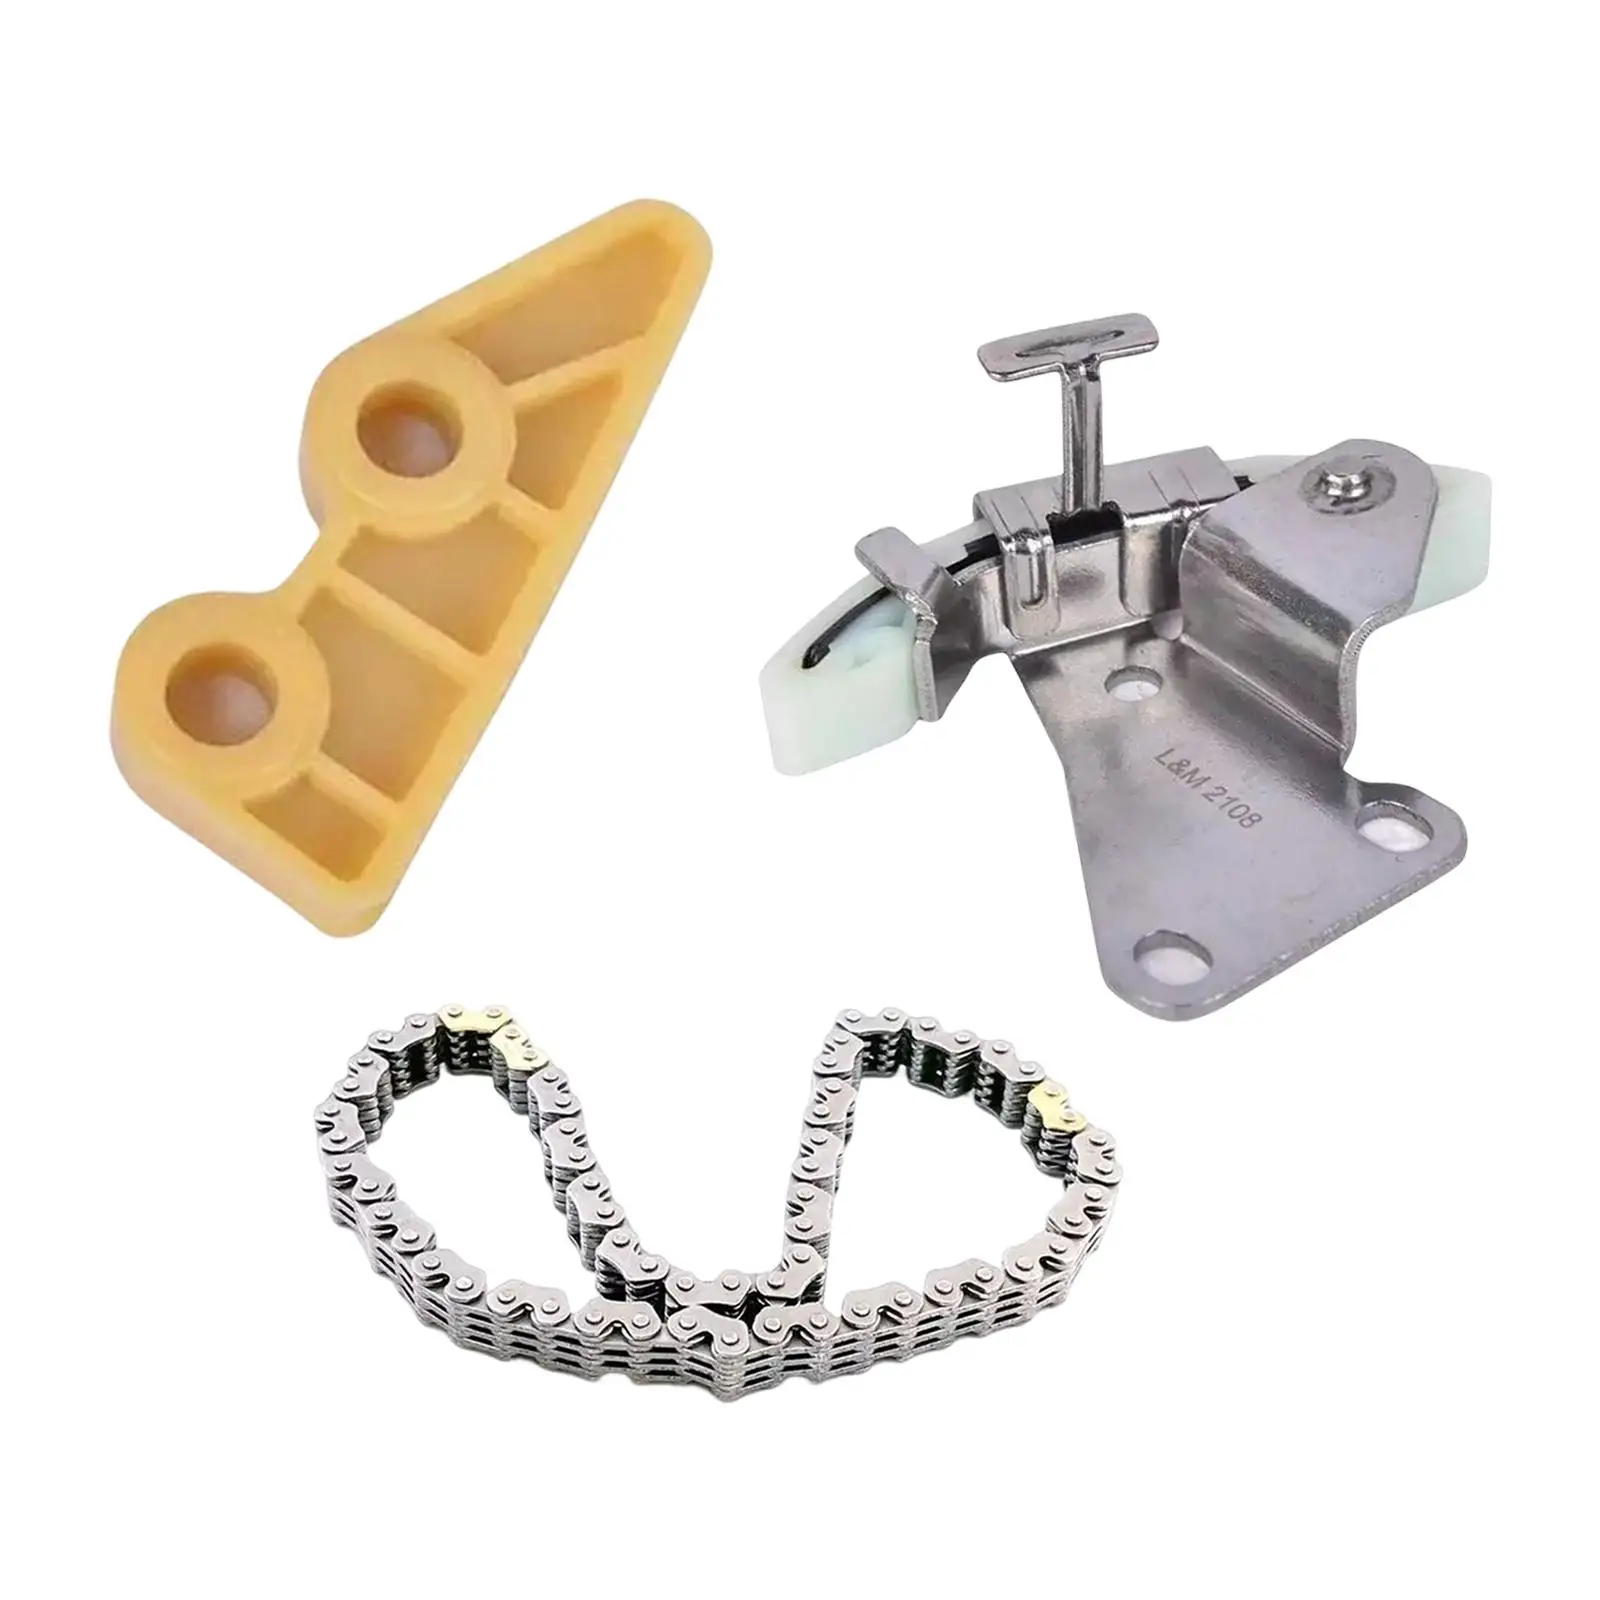 Vehicle Car Oil Pump Chain Tensioner Guide Set Easily Install Replaces 13460-Pnc-004 Durable Accessory